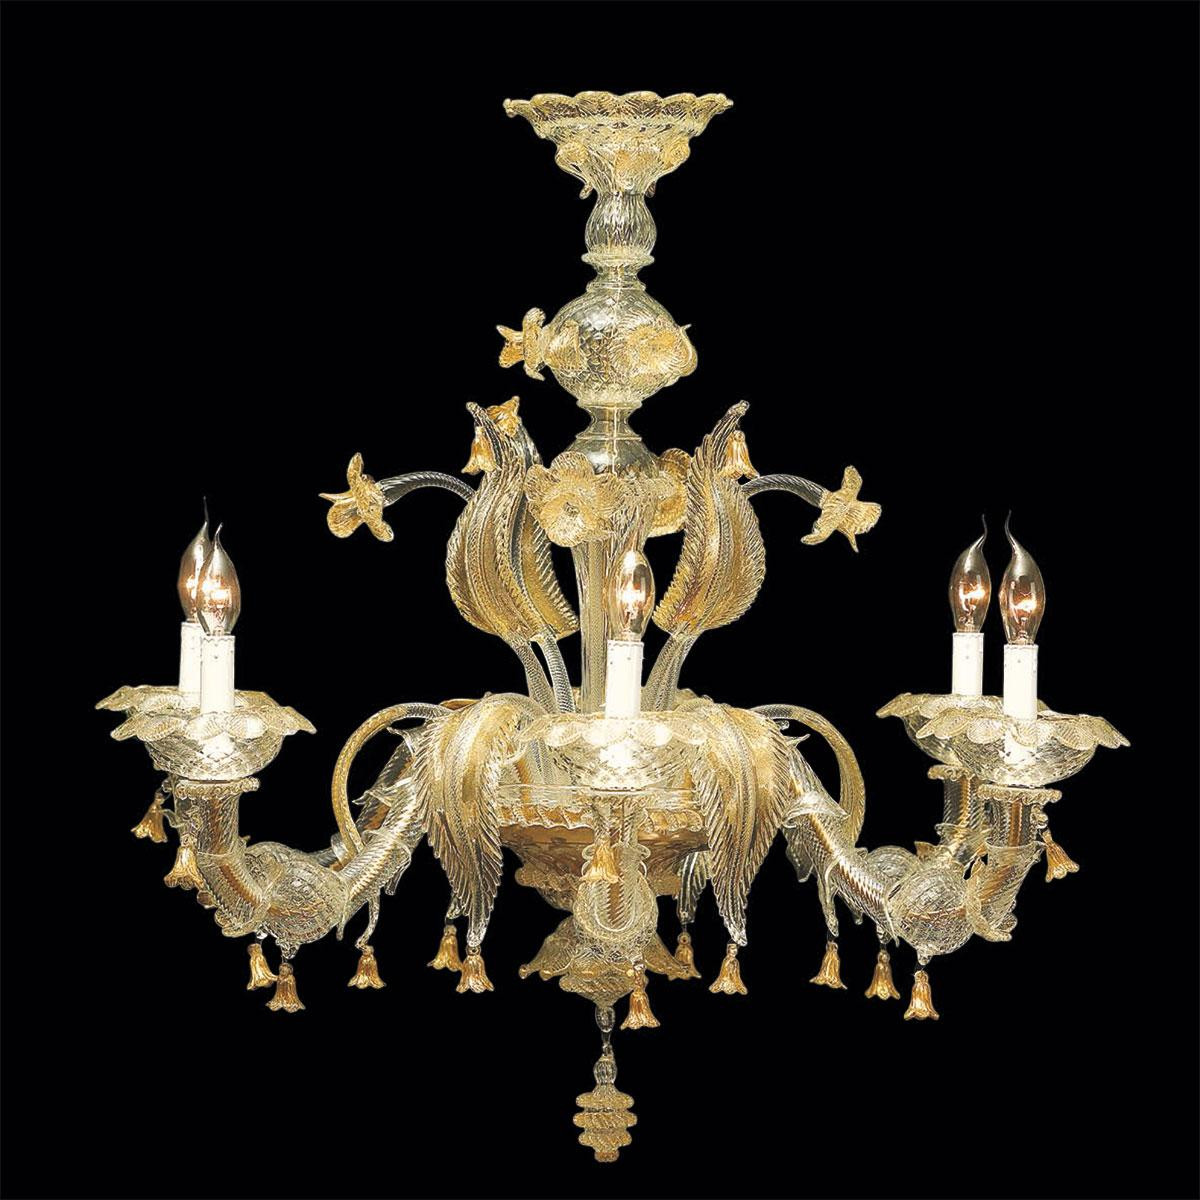 "Valeria" Murano glass chandelier - 6 lights - transparent and gold